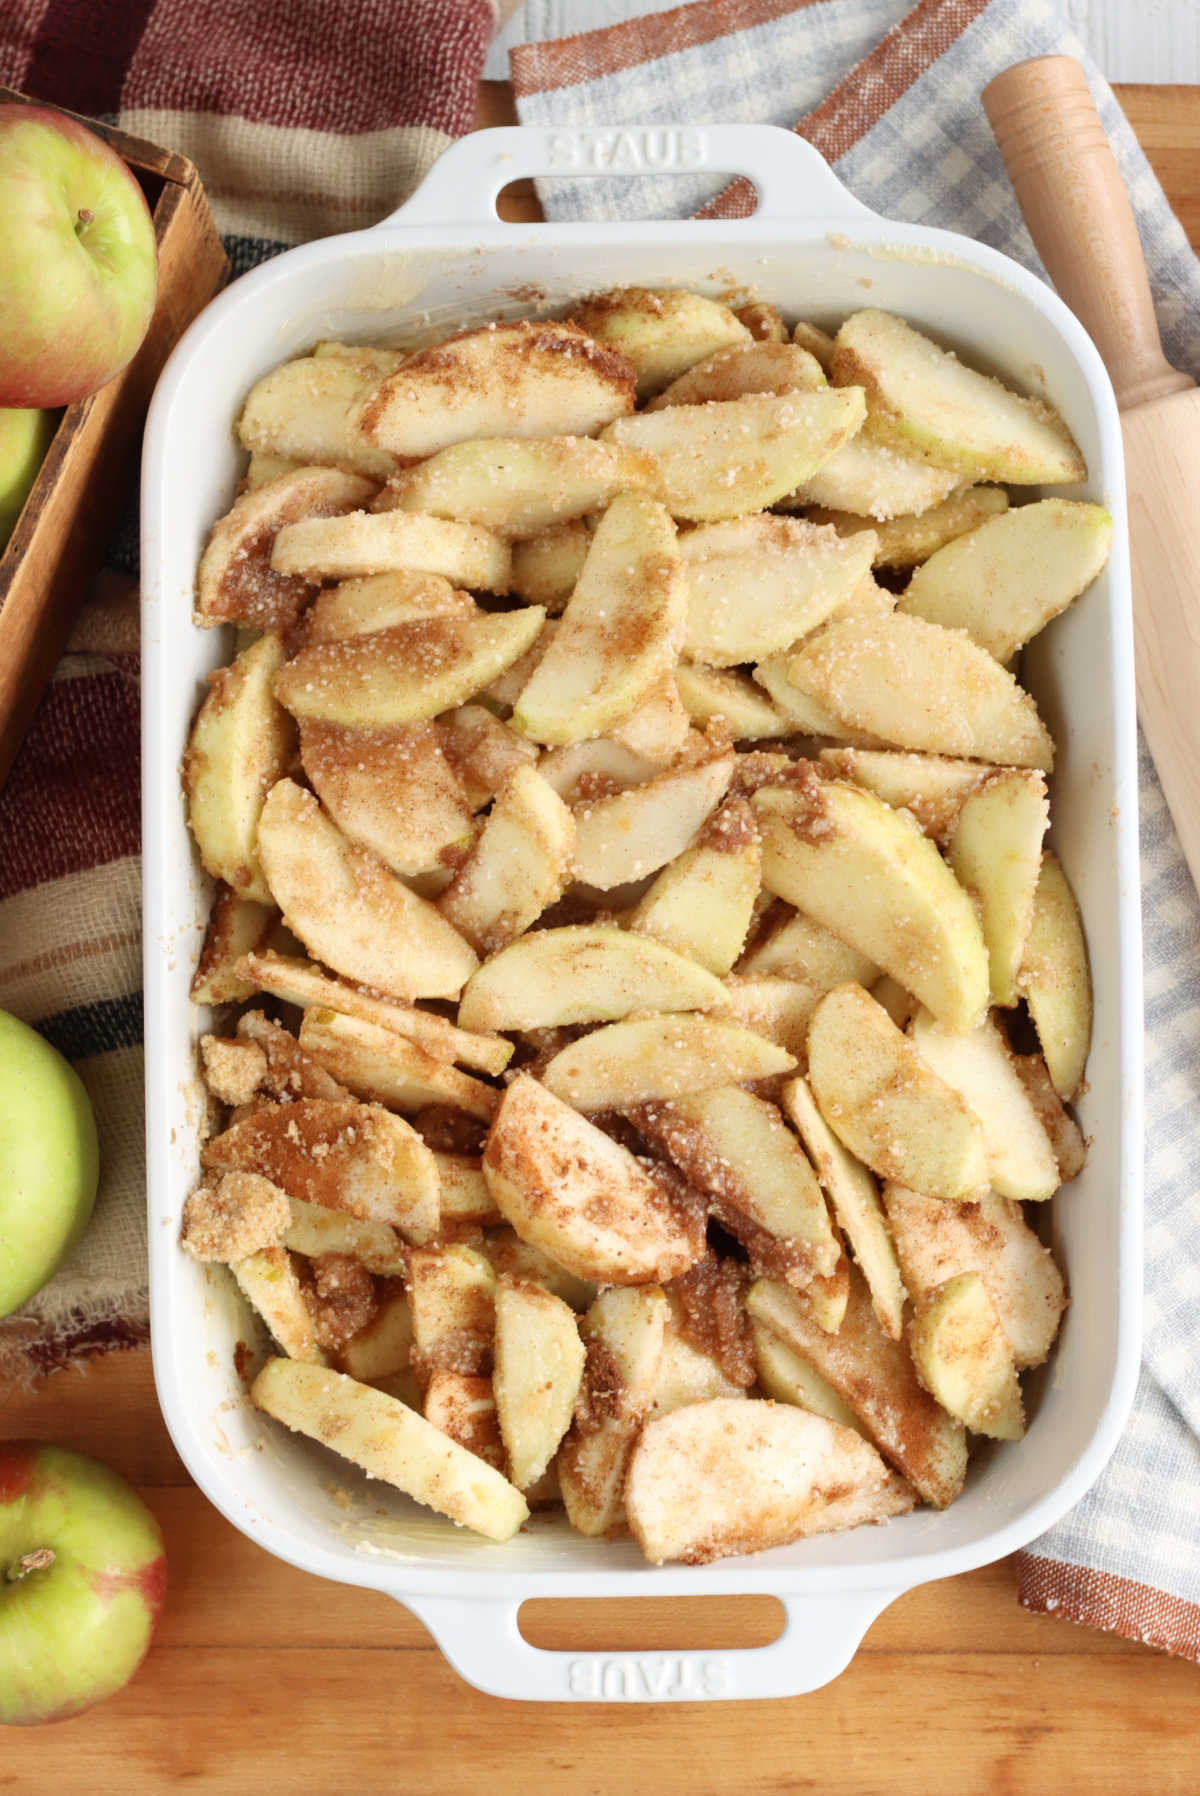 Apple slices, cinnamon sugar in white baking dish on wooden cutting board, fresh apples around, rolling pin.